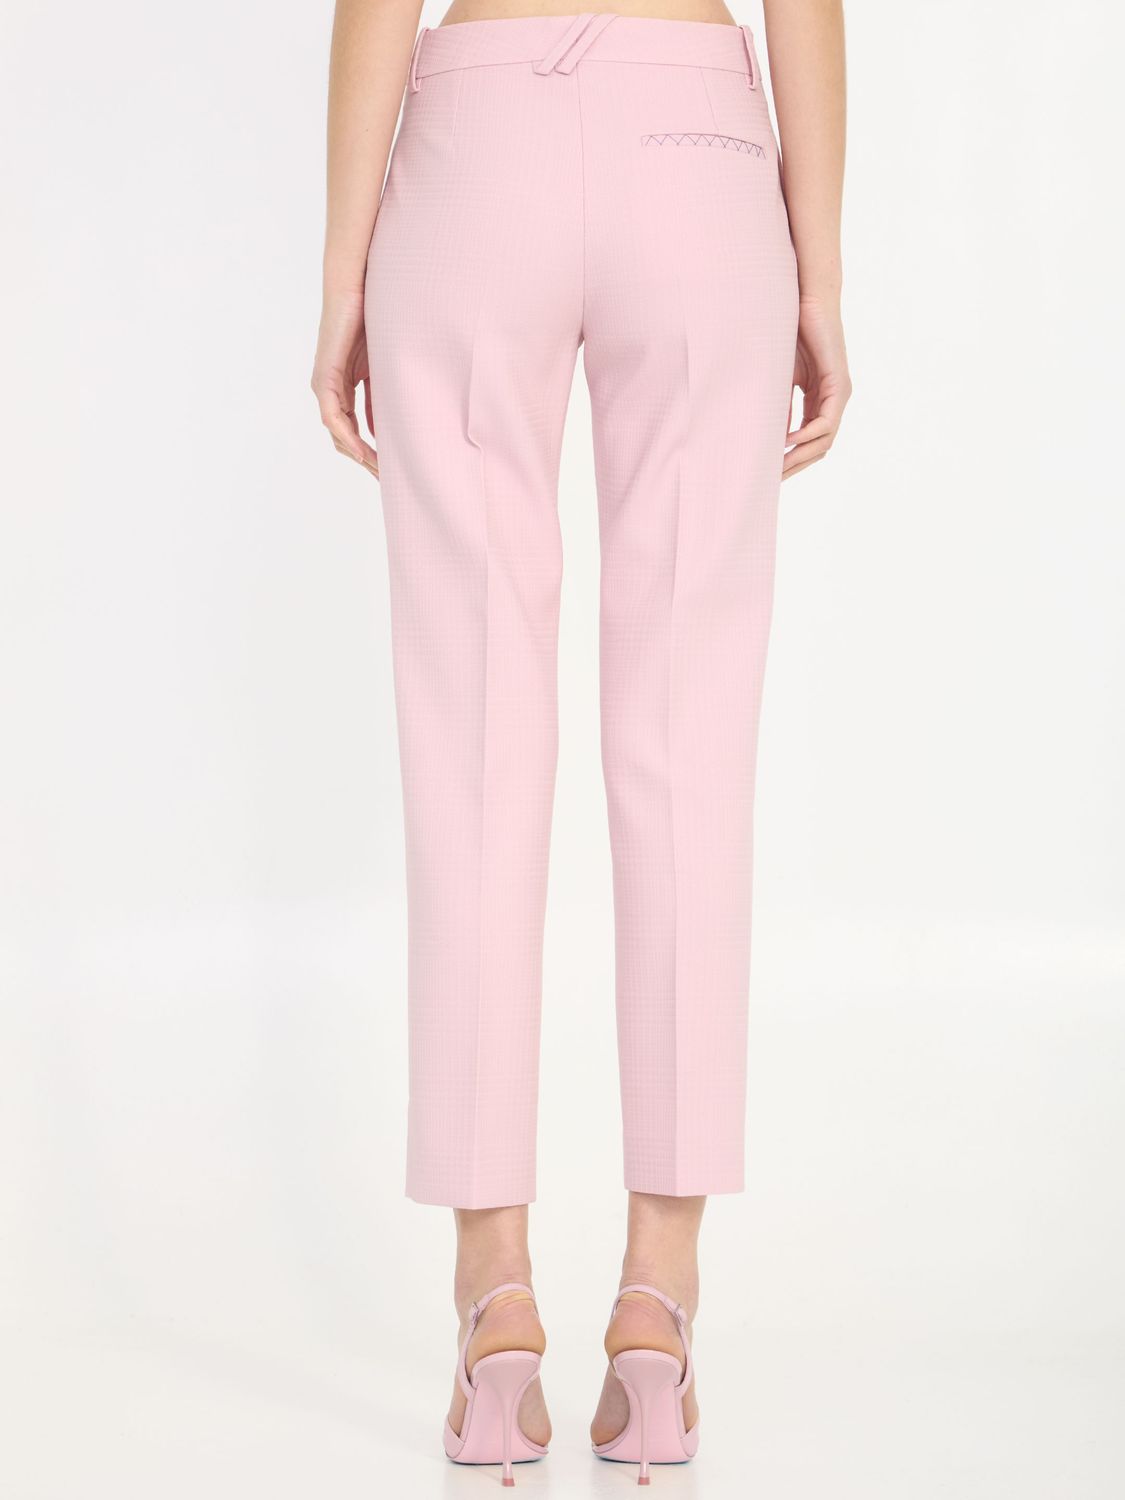 Stylish Tailored Trousers in Vibrant Pink - Regular Fit - UK Sizes